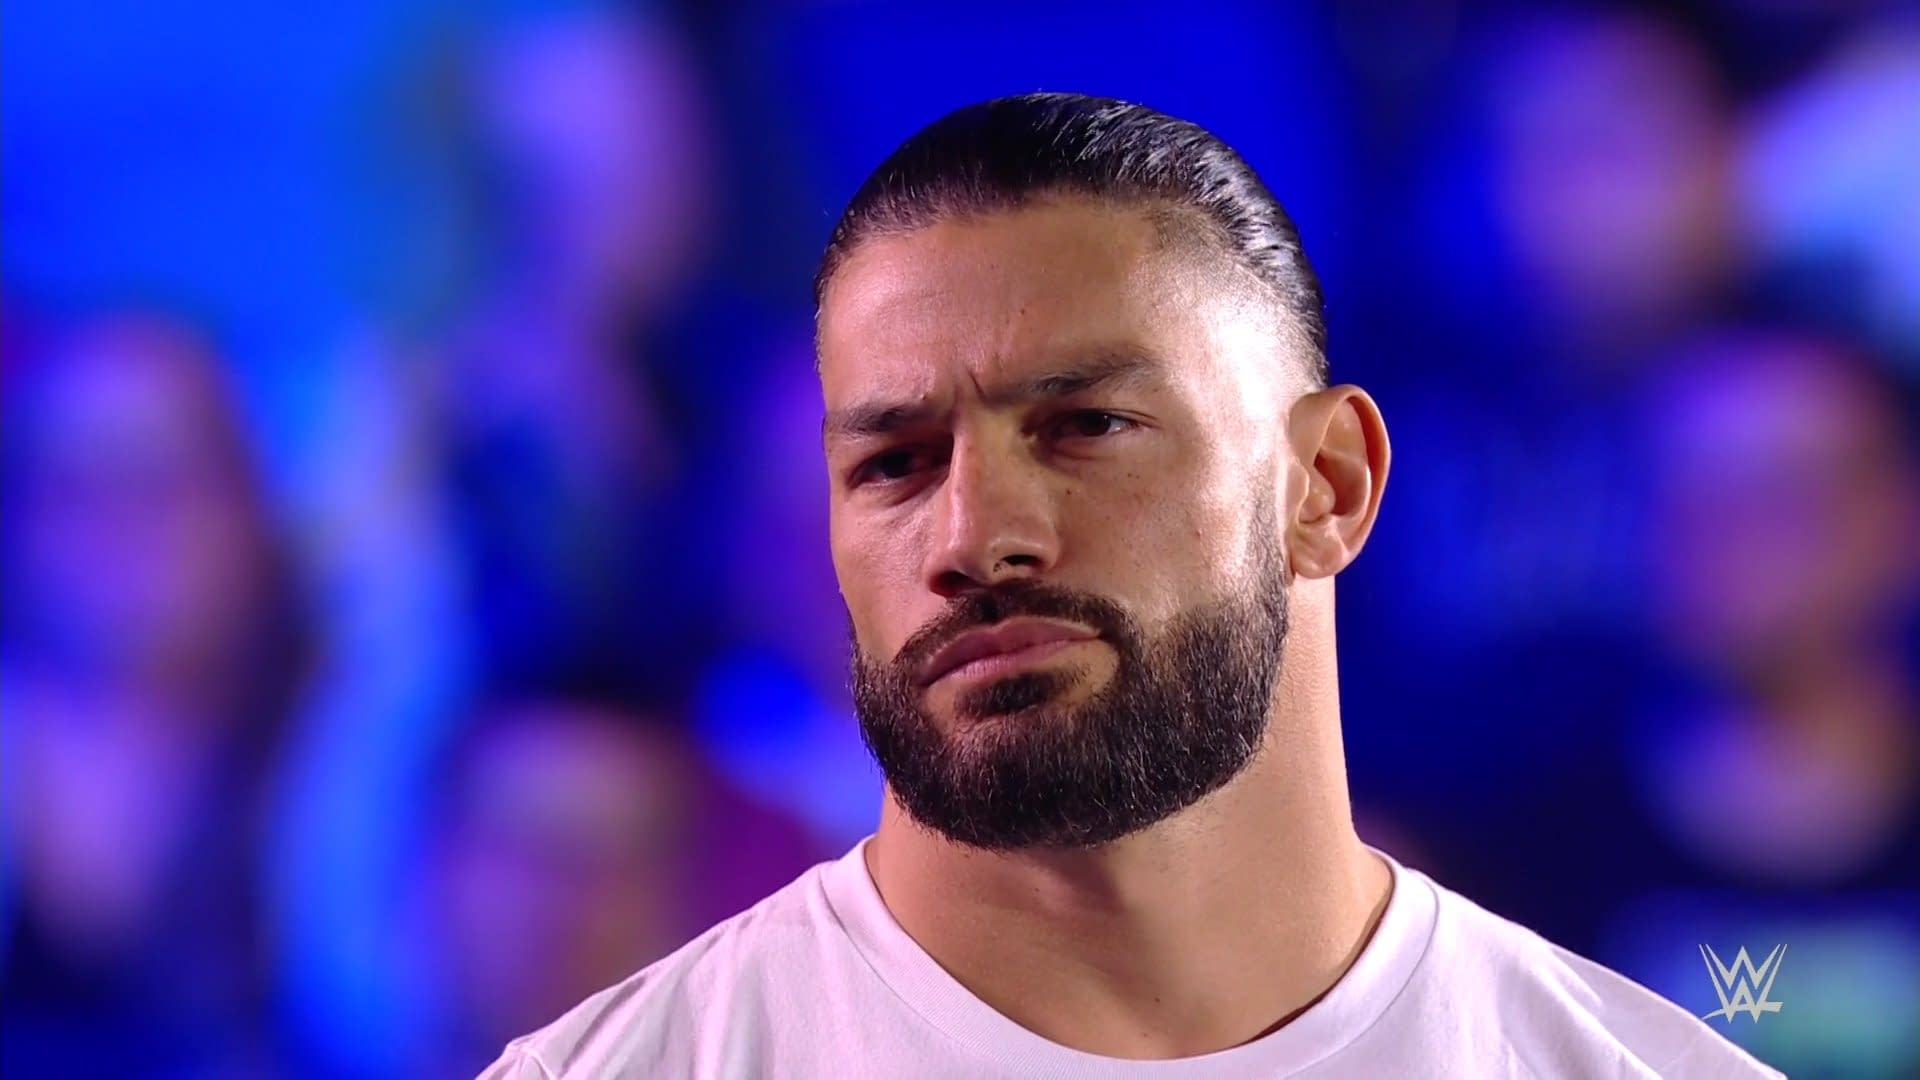 Is Roman Reigns About to Break Up with WWE?